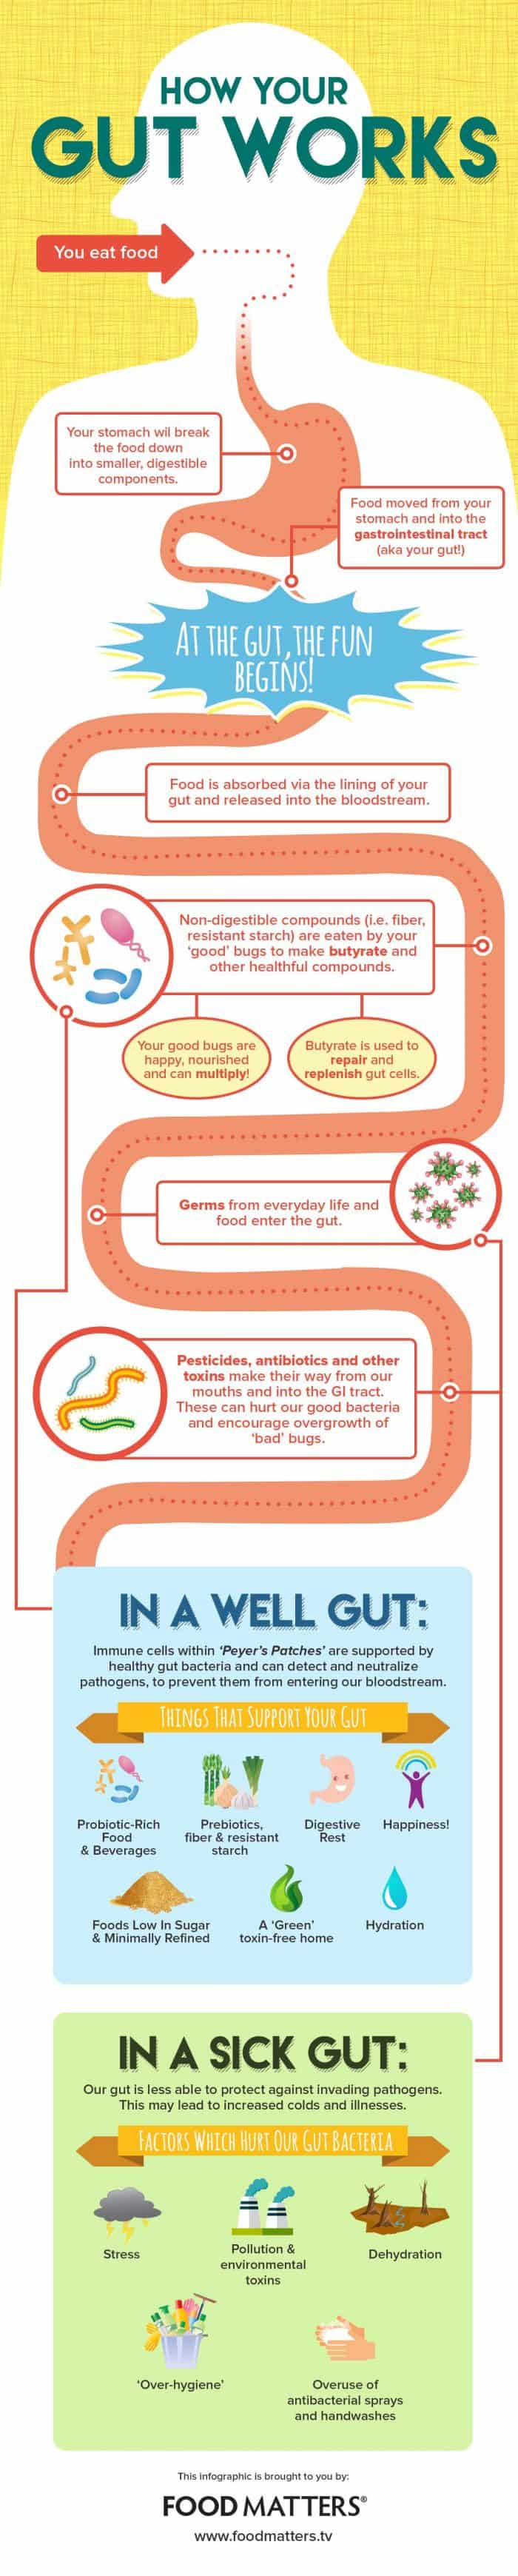 Gut Health Infographic with tips to keep your GI tract healthy